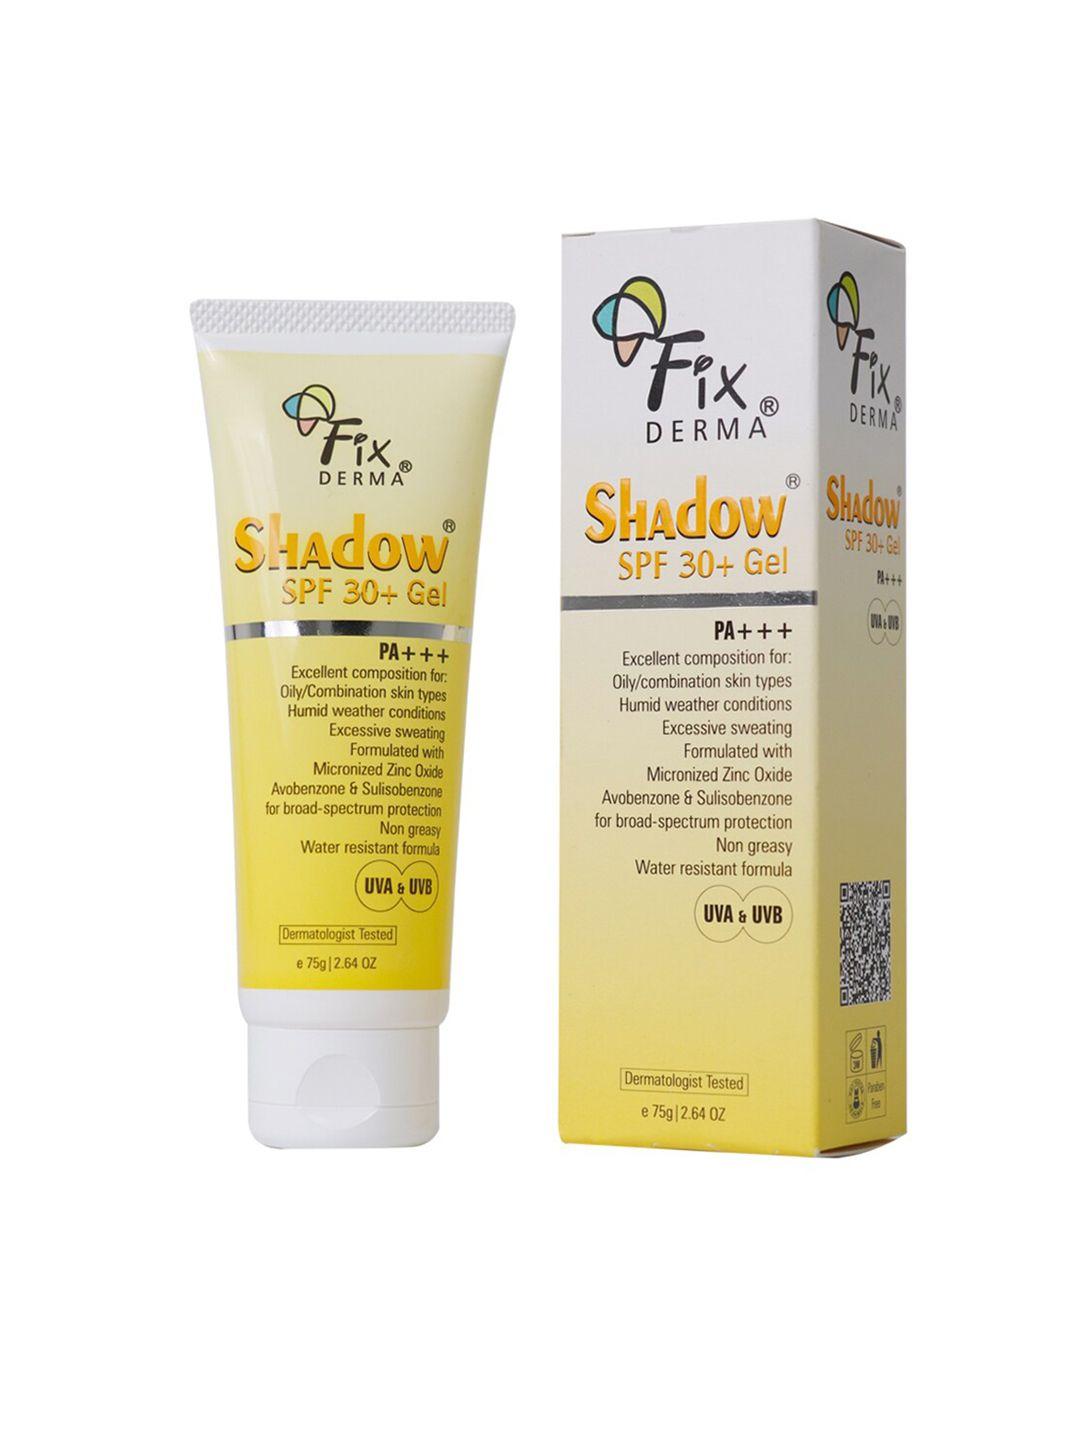 fixderma-shadow-sunscreen-spf-30+-gel-for-oily-skin-with-pa+++-protection---75g